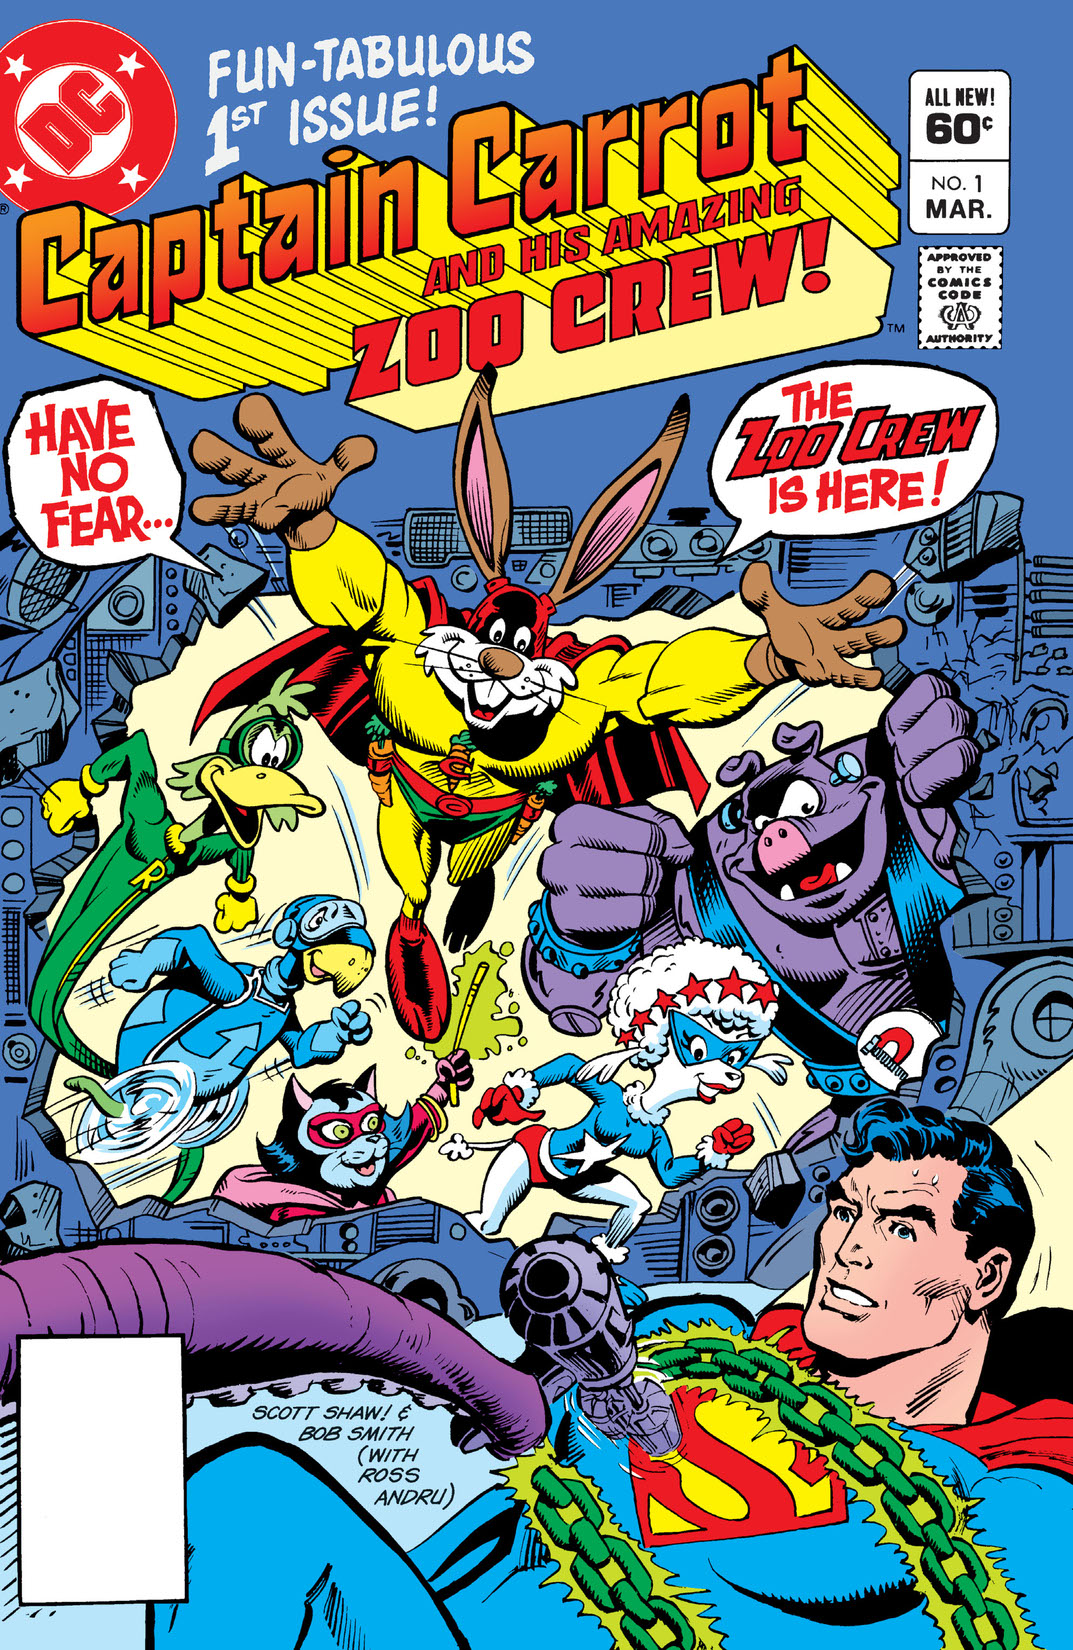 Captain Carrot and His Amazing Zoo Crew #1 preview images